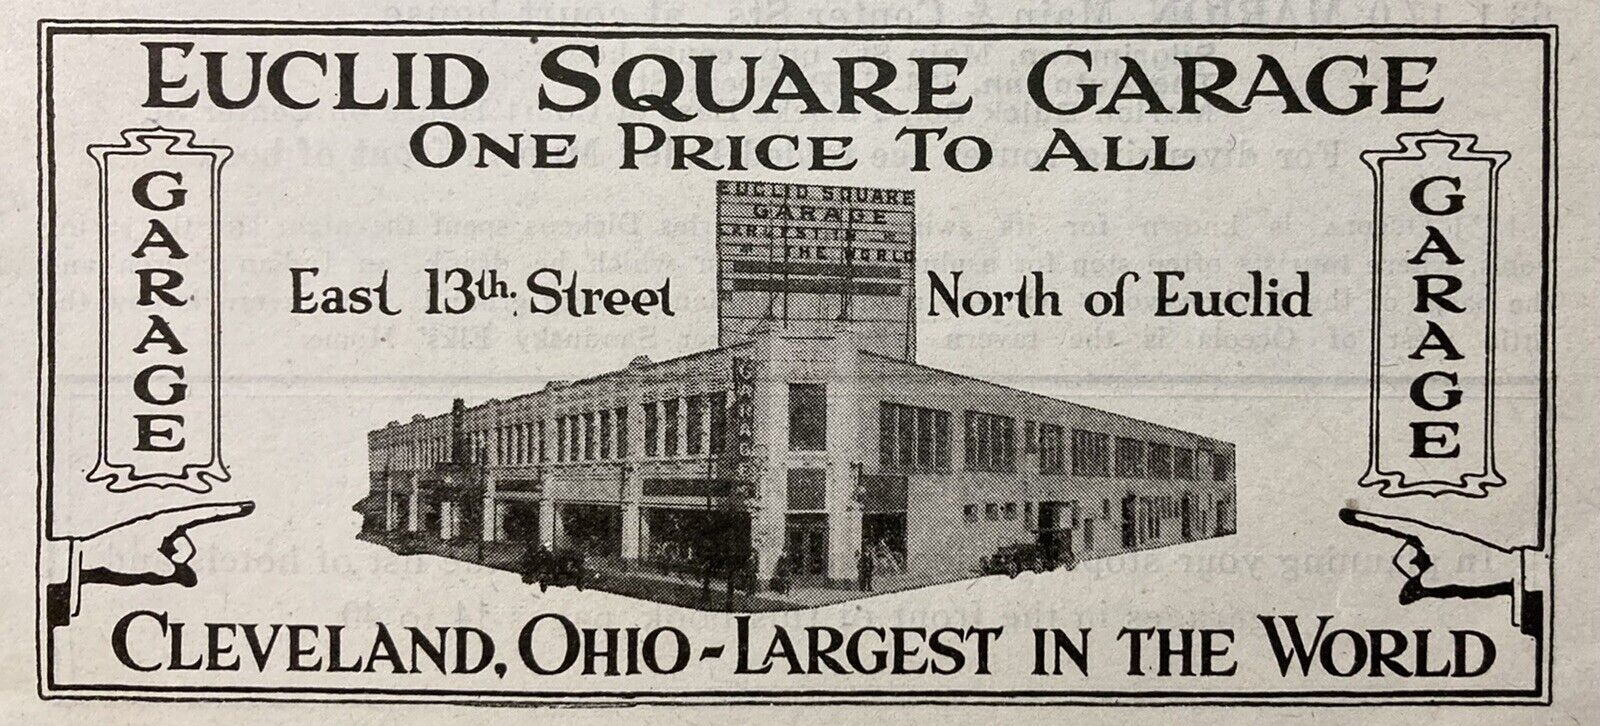 Historical ticket advertising the old parking garage 